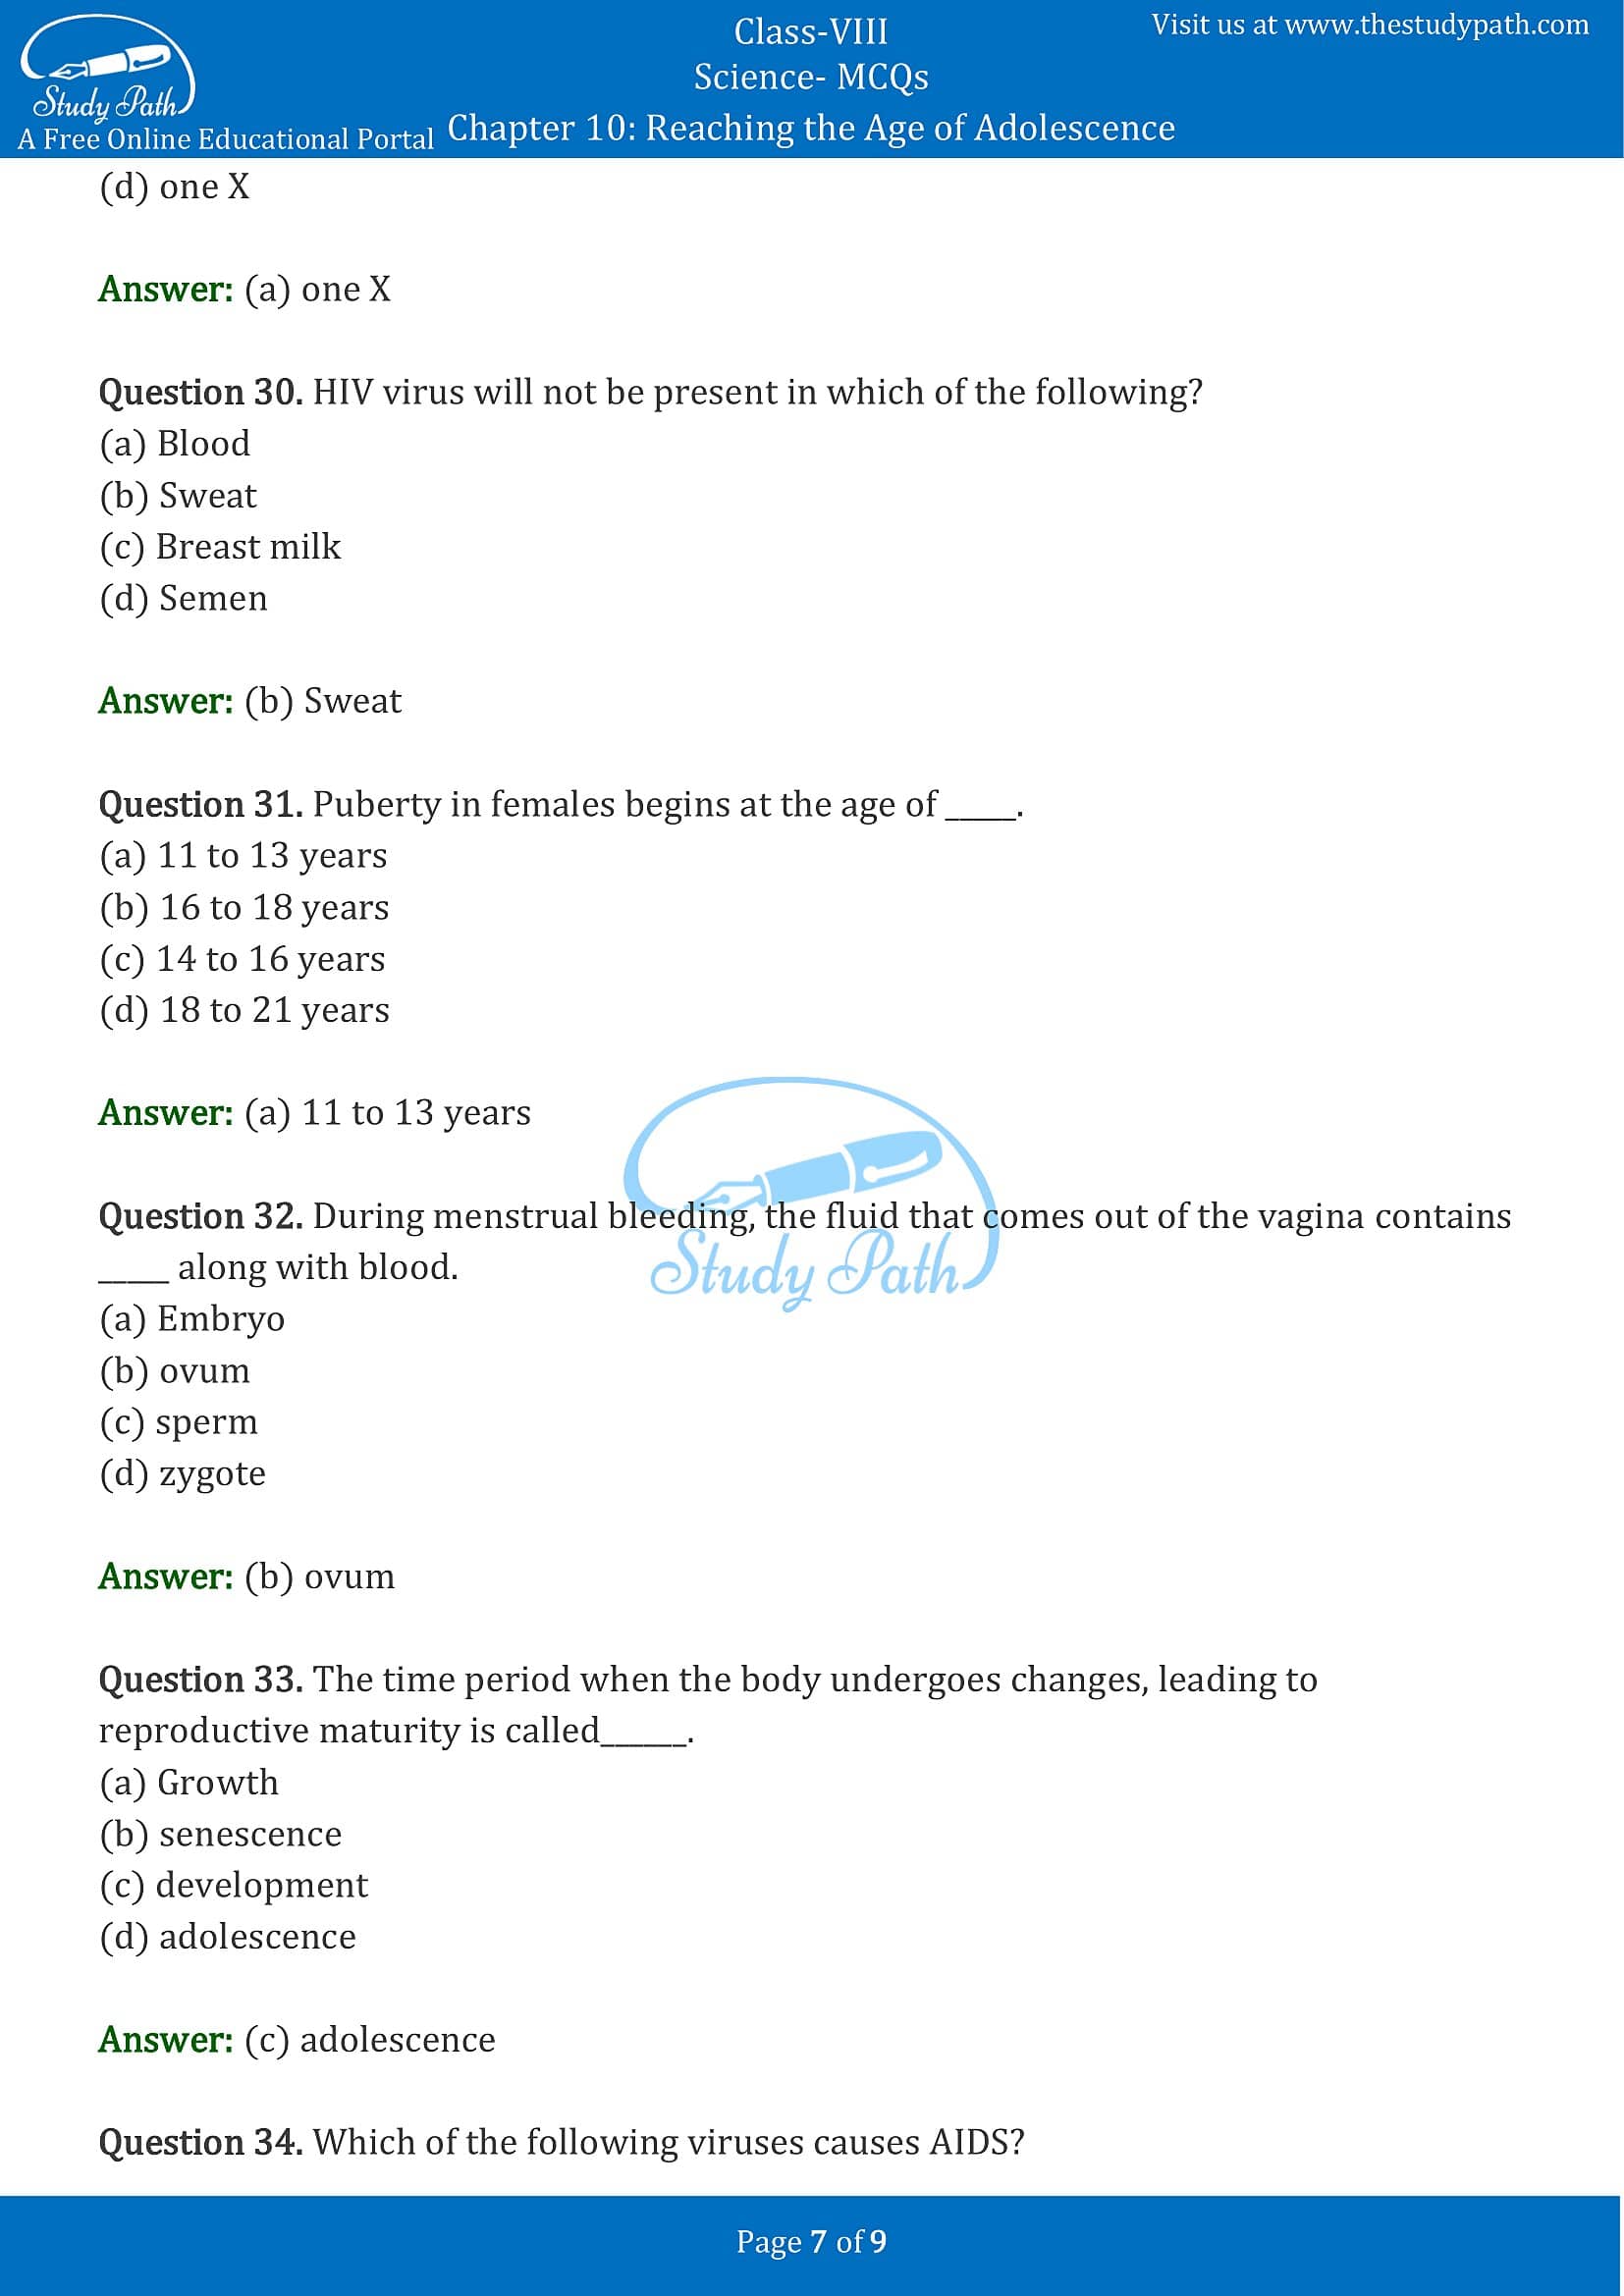 MCQ Questions for Class 8 Science Chapter 10 Reaching the Age of Adolescence with Answers PDF -7